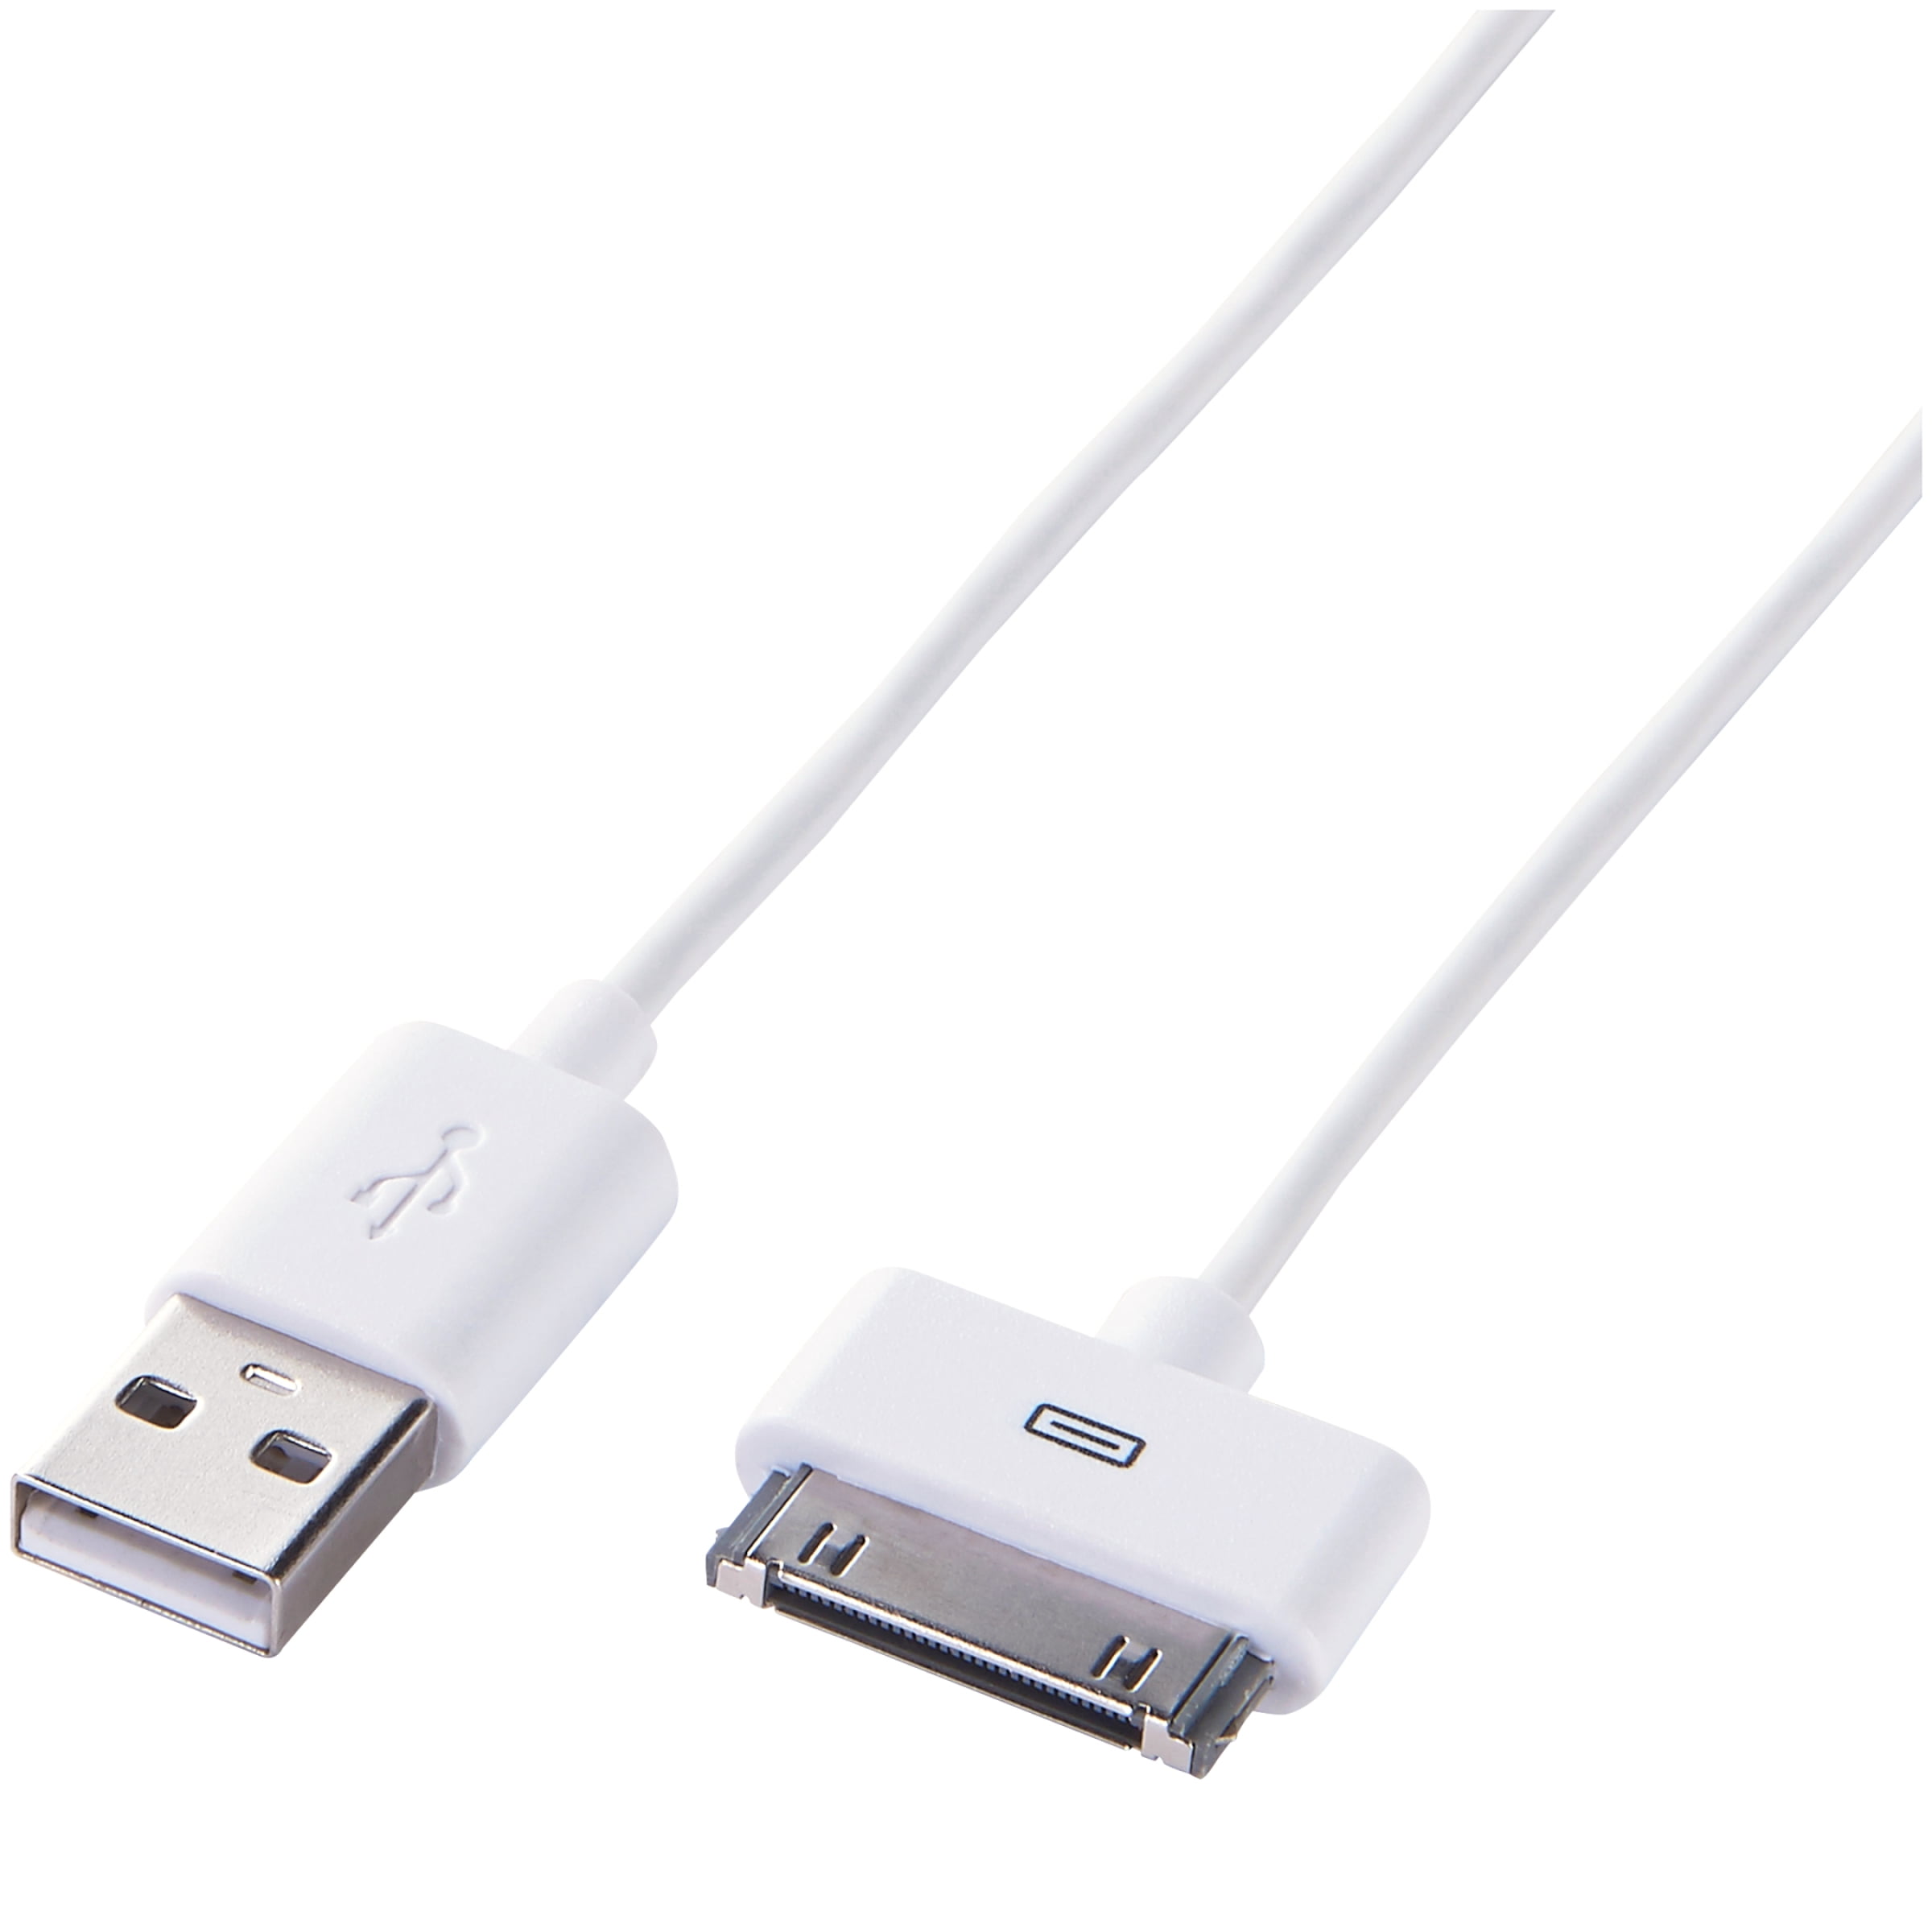 B2G1 Free NEW HOT USB Data Charger Cable Cord for Apple iPad Pad 1st GEN 32GB 